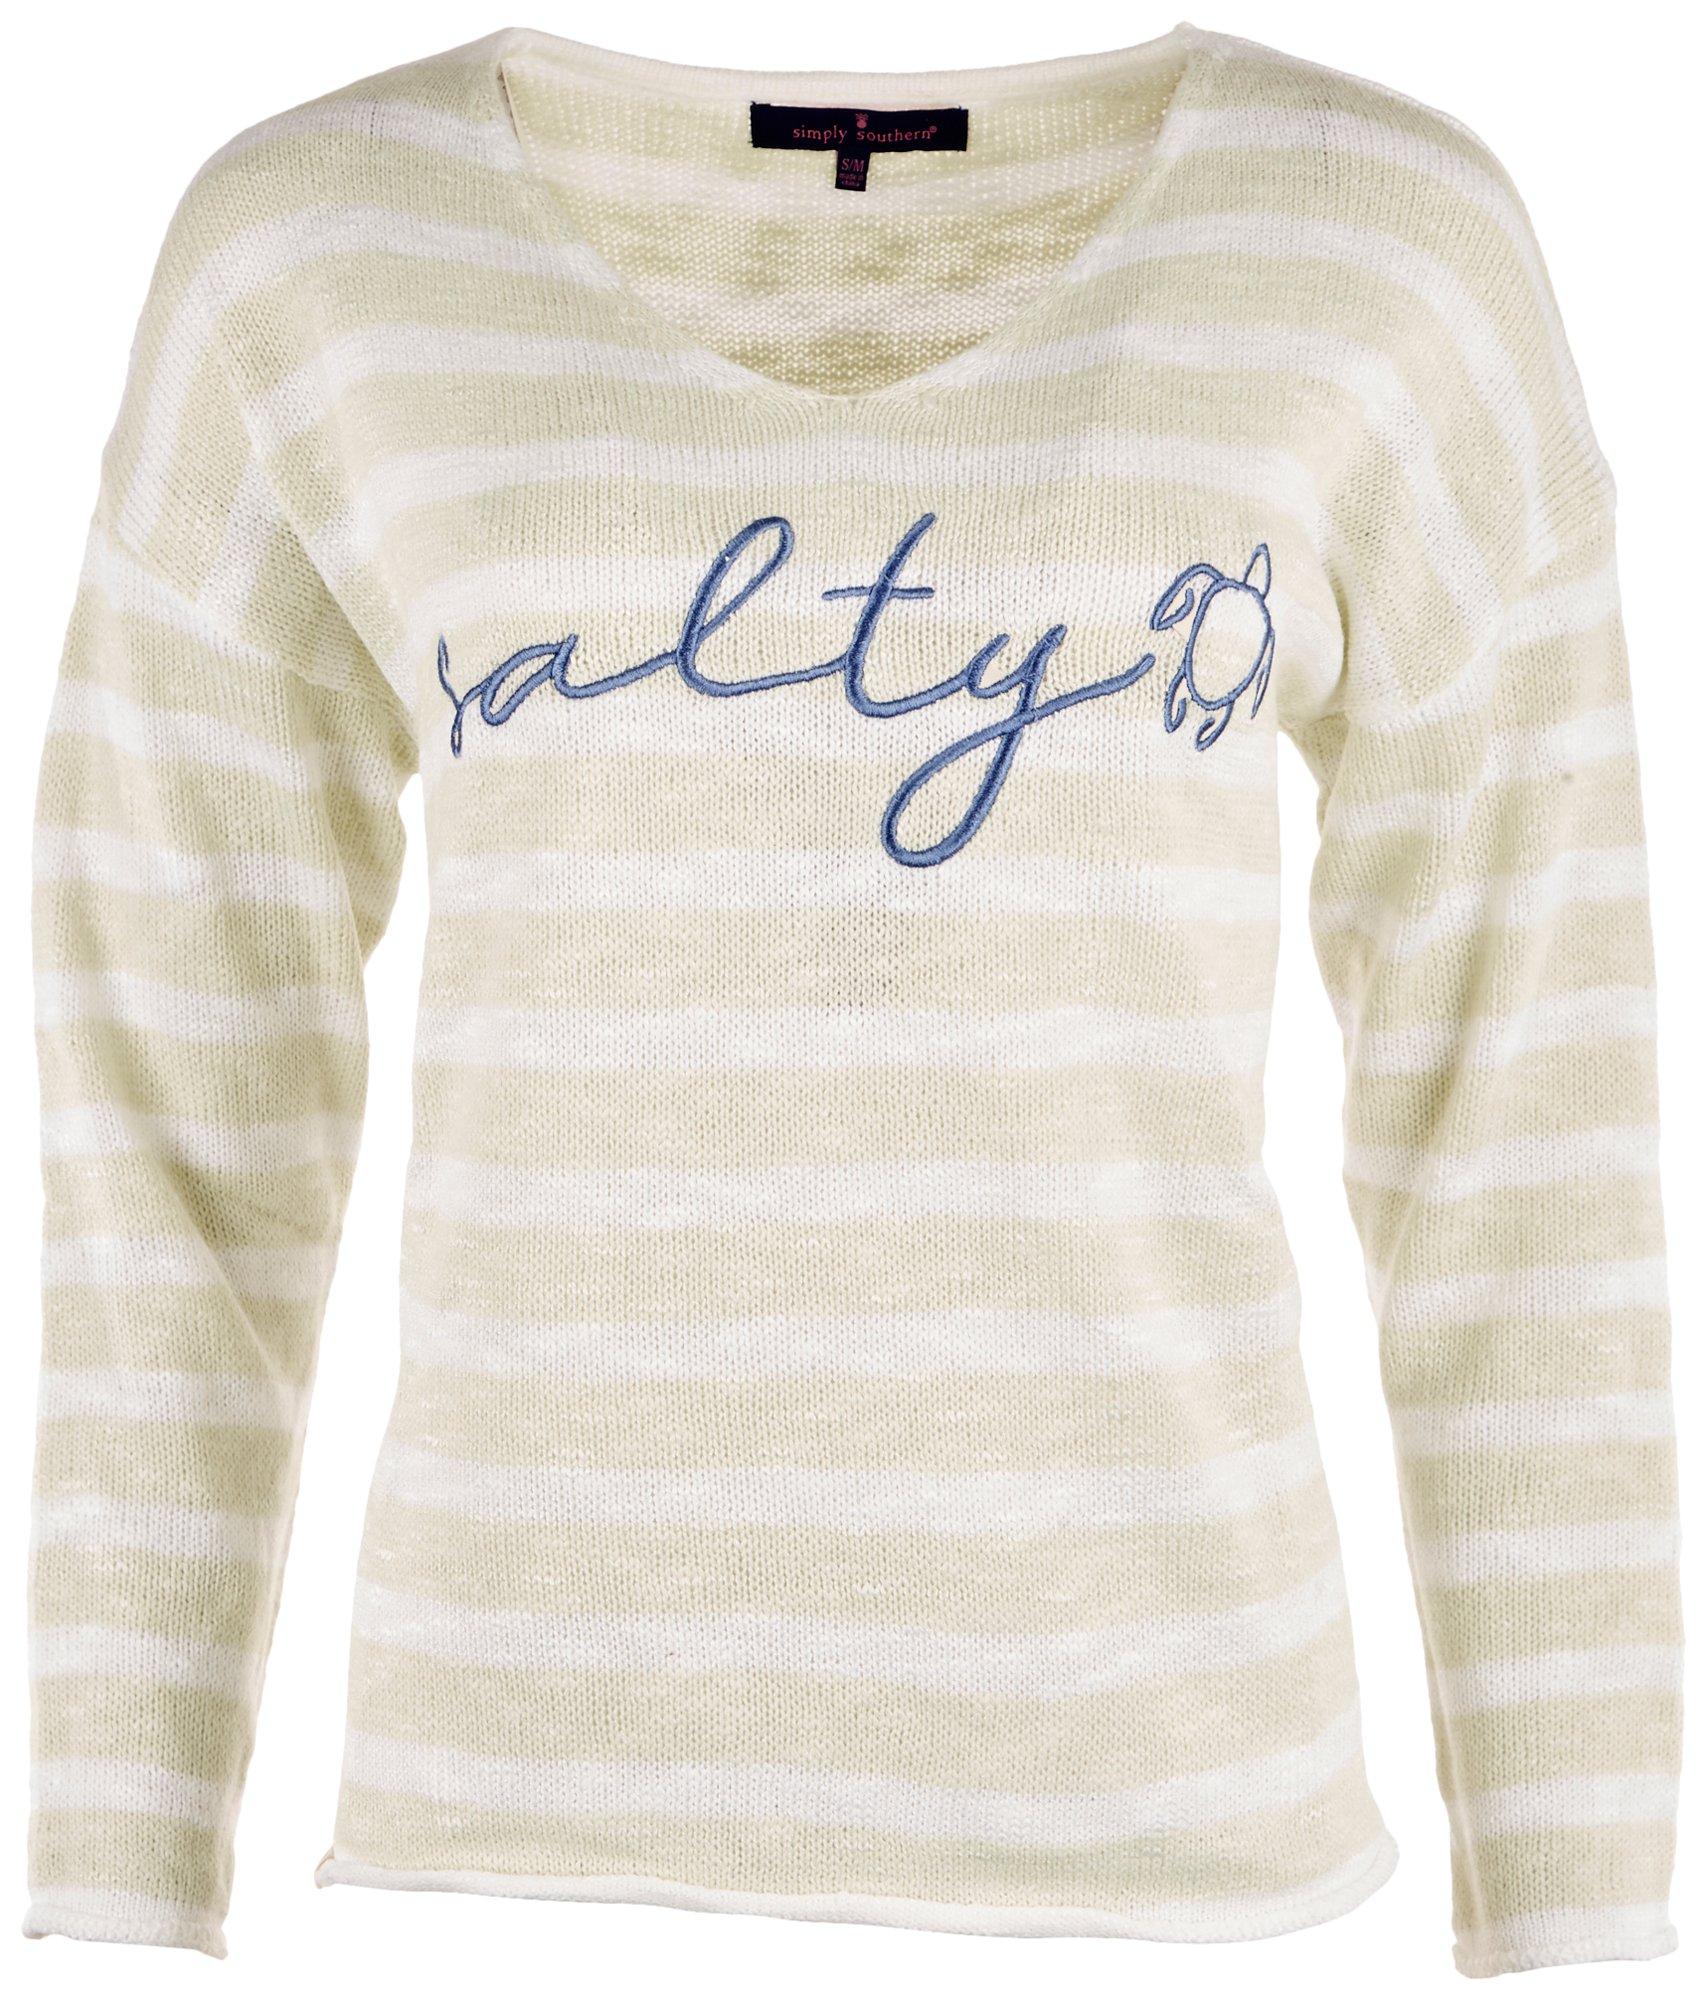 Simply Southern Juniors Pull Over Sweater